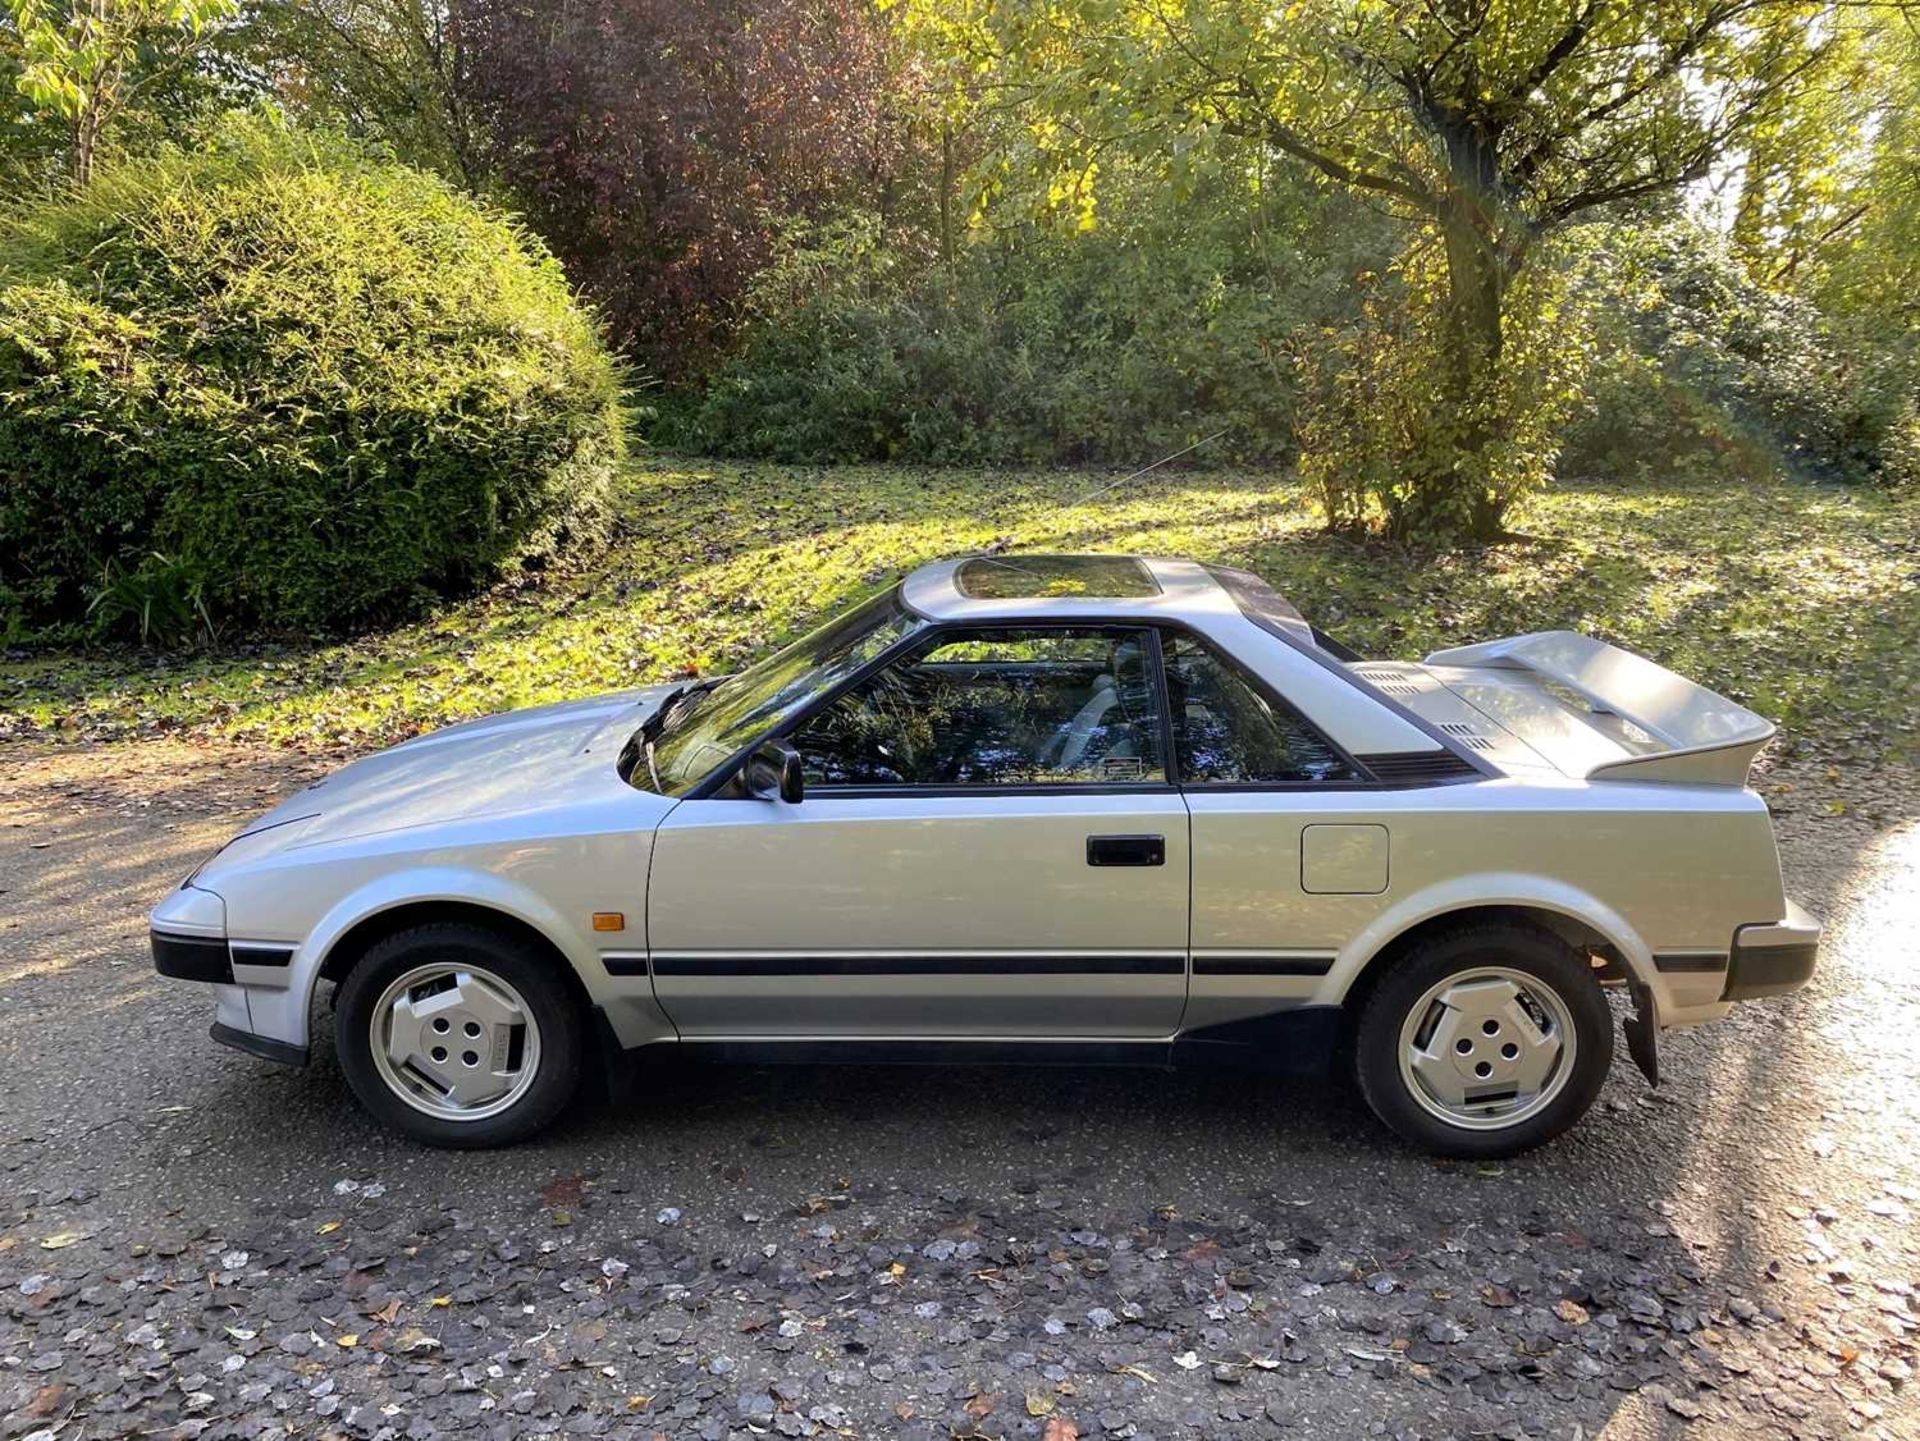 1985 Toyota MR2 Coupe Restored example of an appreciating modern classic - Image 14 of 100